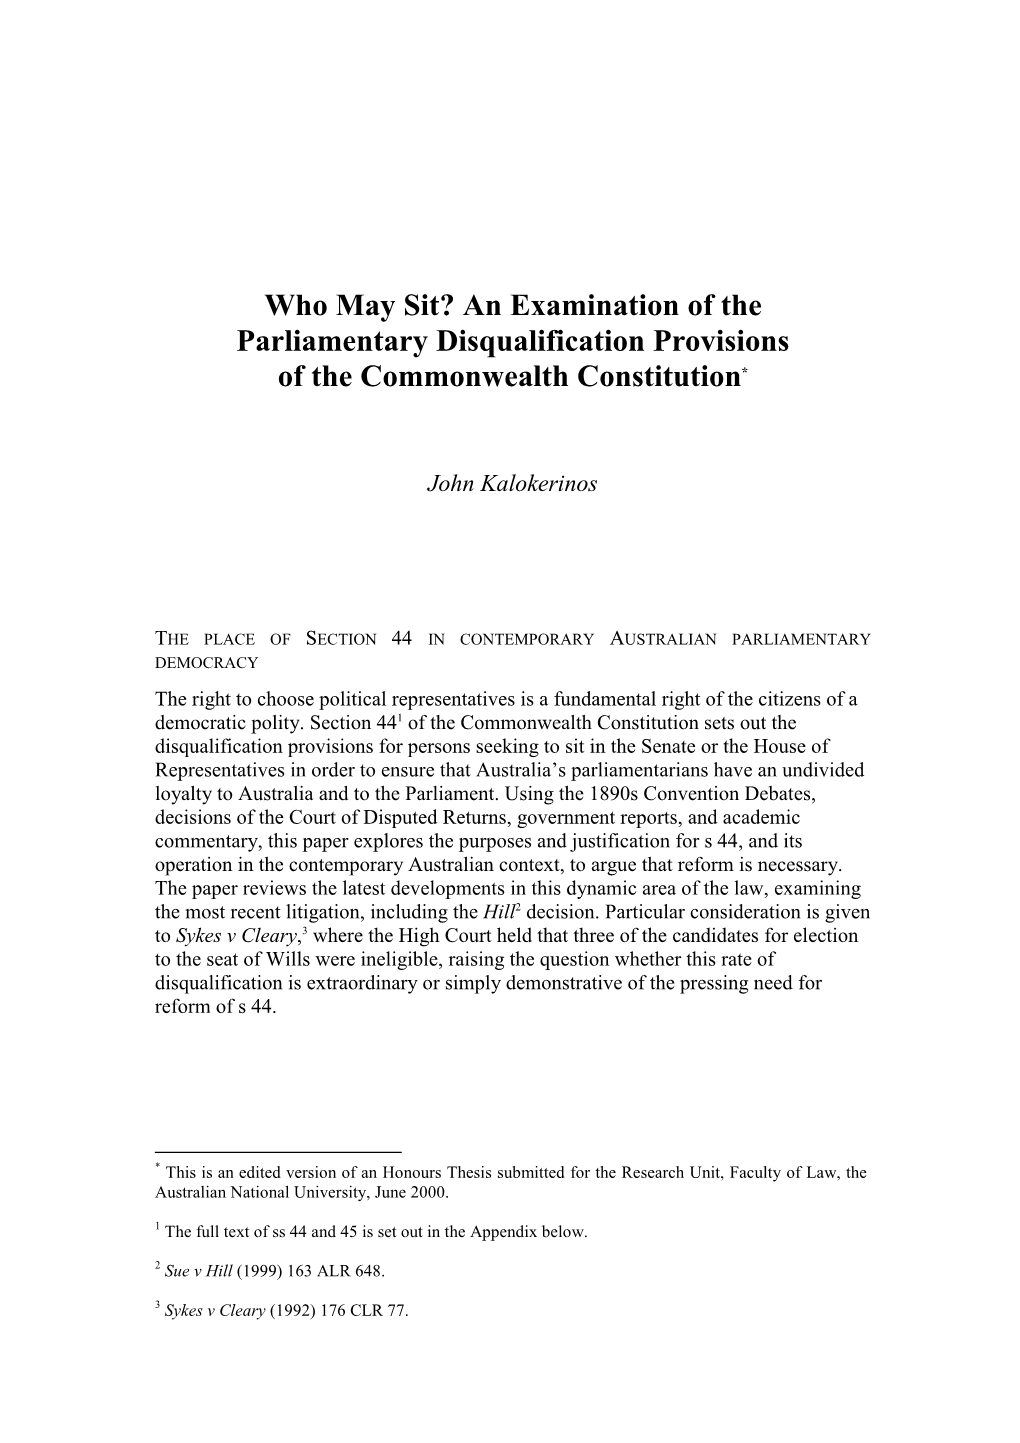 An Examination of the Parliamentary Disqualification Provisions of the Commonwealth Constitution*